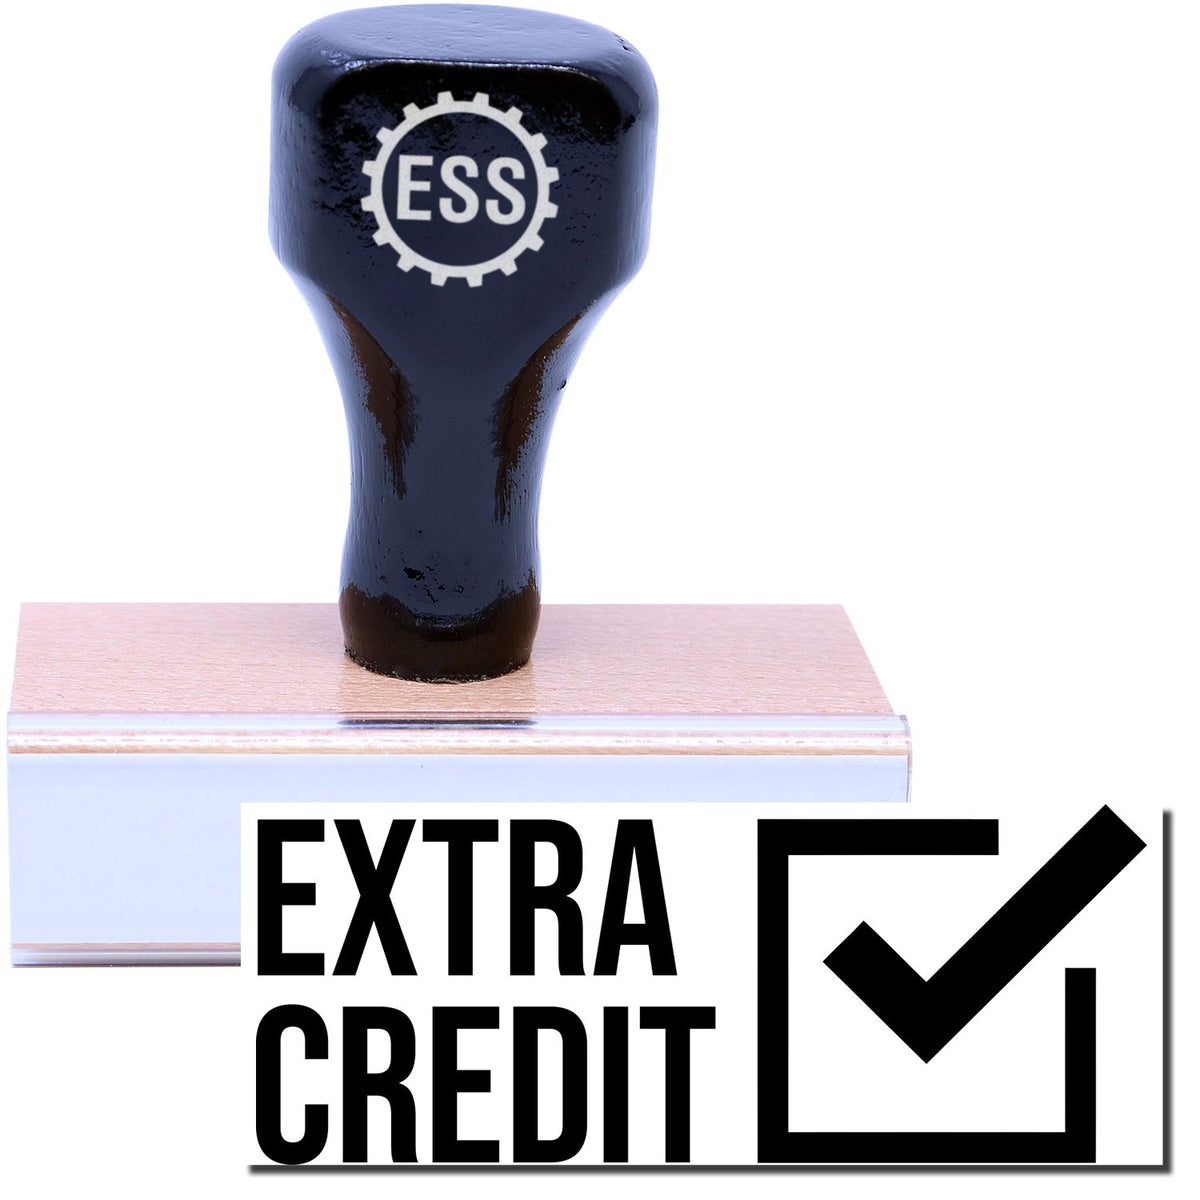 A stock office rubber stamp with a stamped image showing how the text &quot;EXTRA CREDIT&quot; in a large bold font with a checked box on the right side is displayed after stamping.